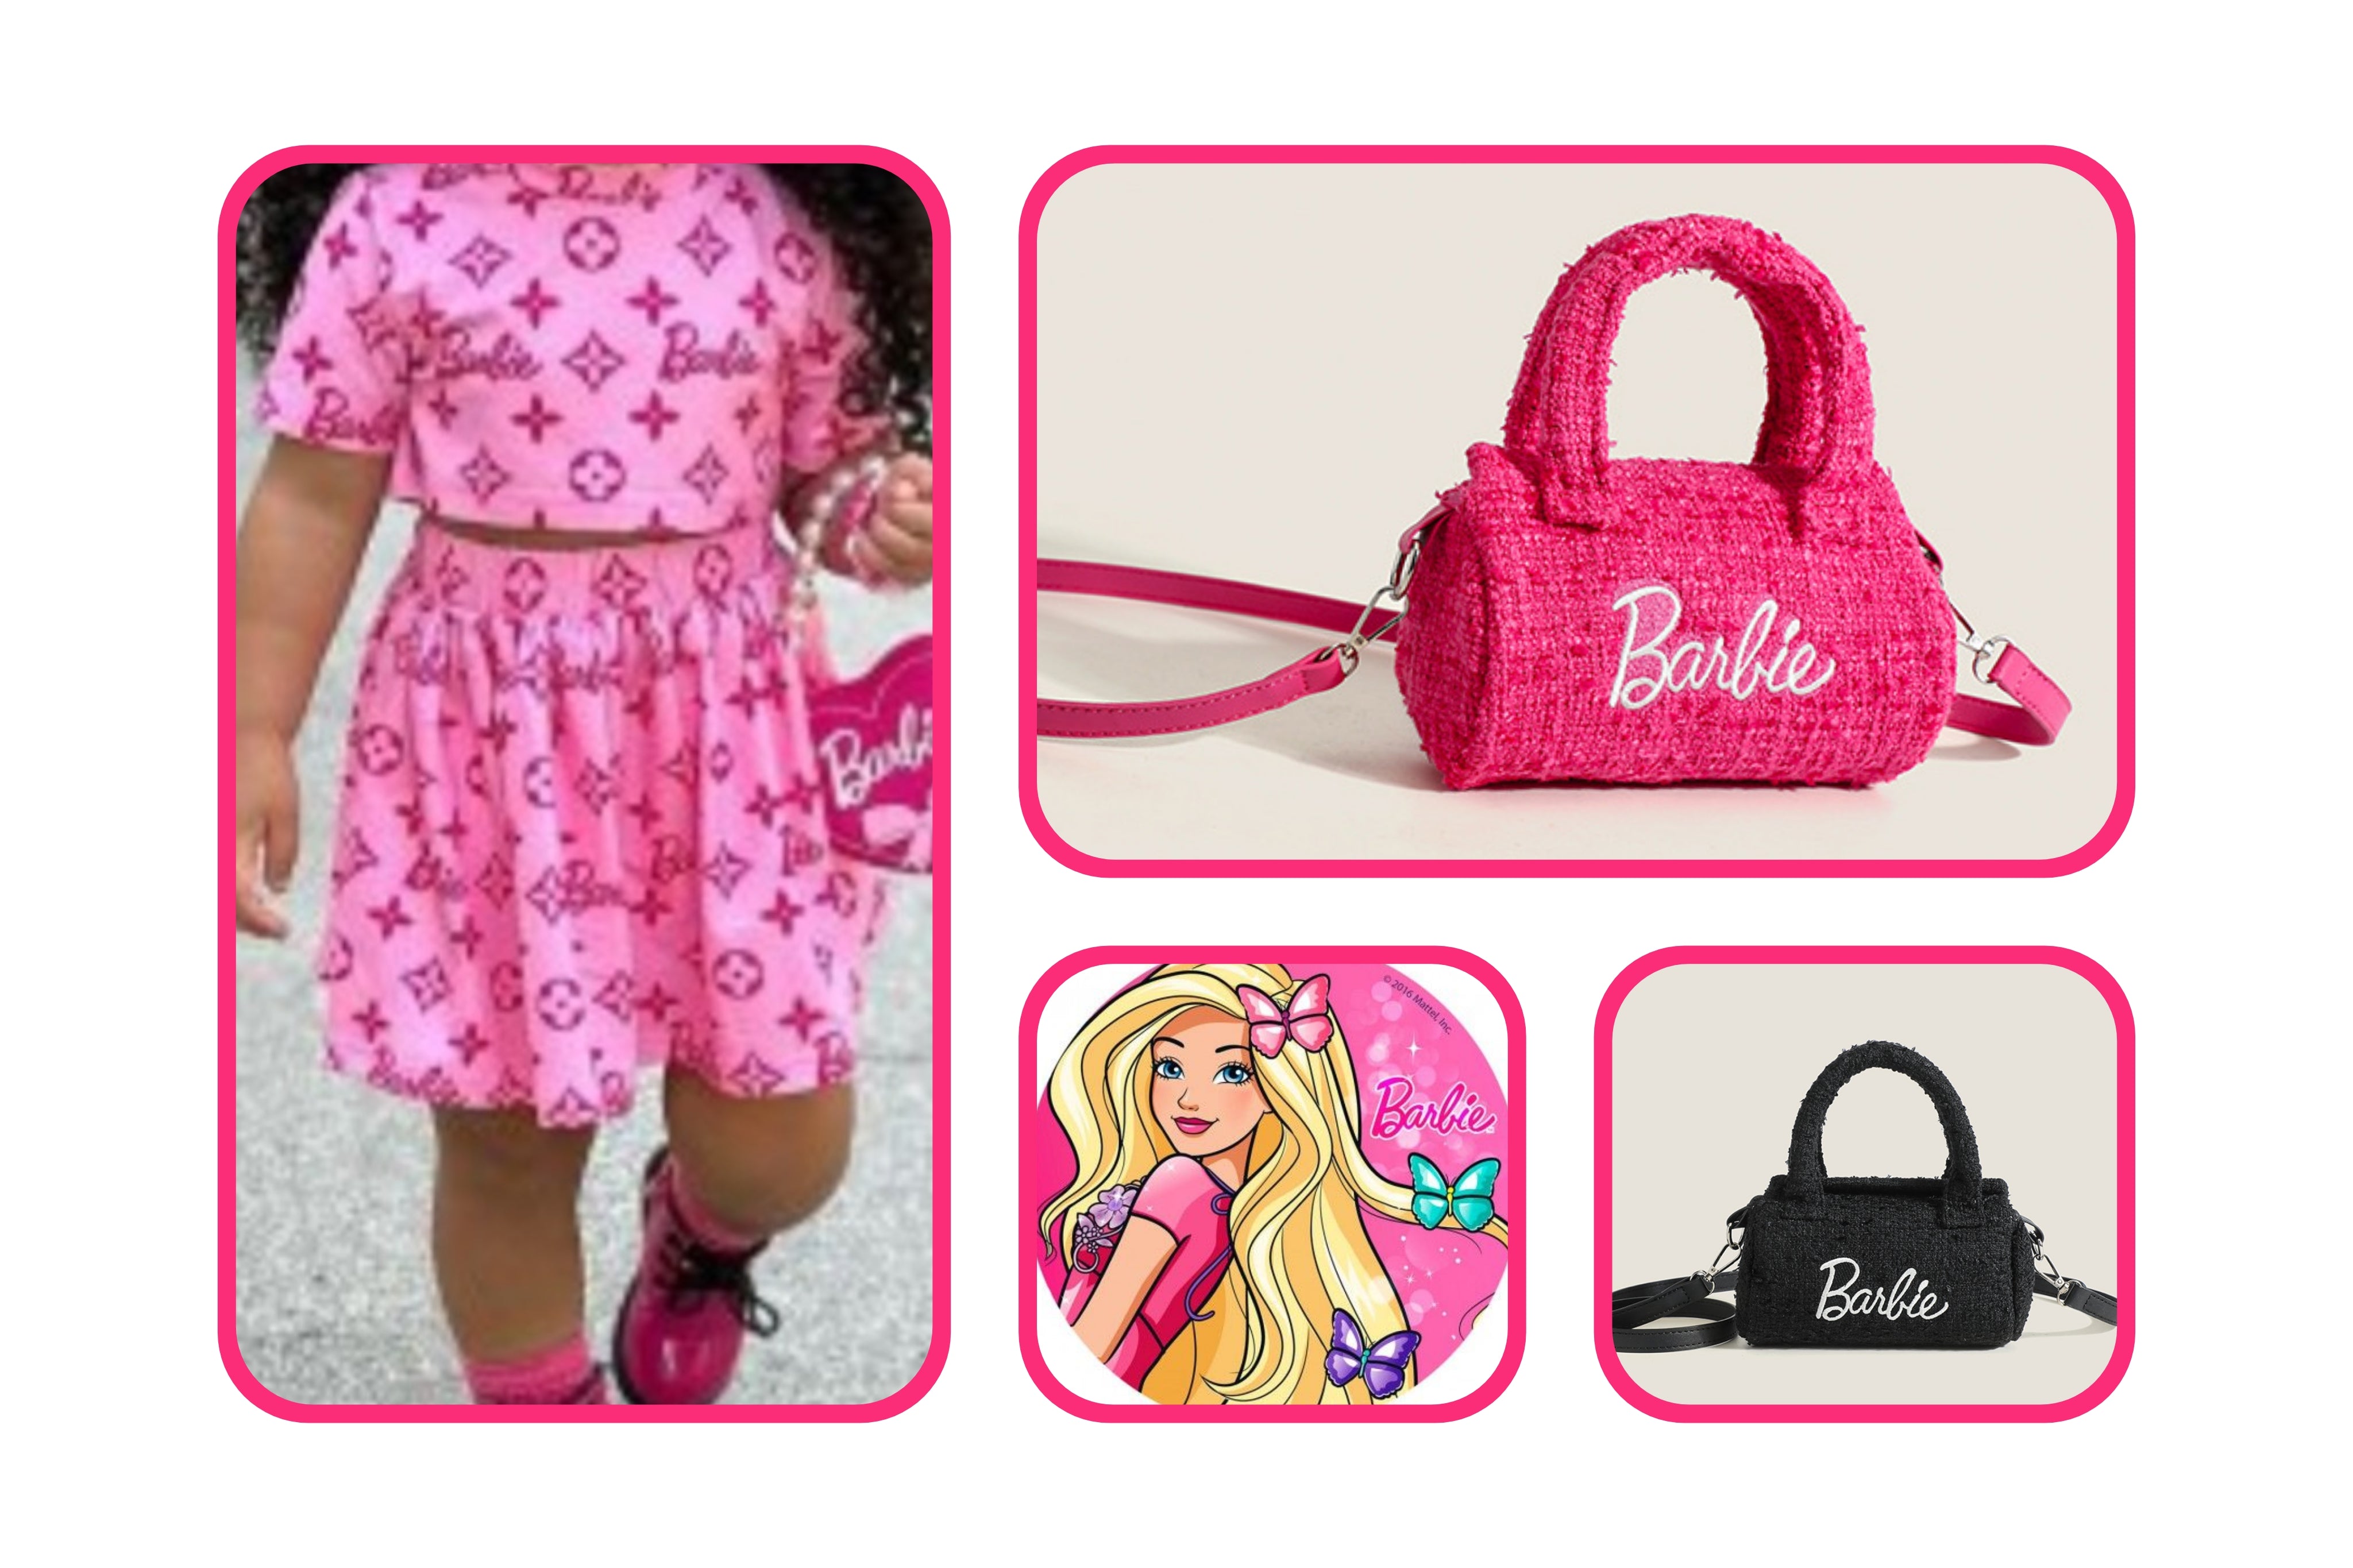 Loungefly Bags | Barbie Lock Pvc Cross Body Bag, Gold/Pink, (One Size), New  | Tradesy | Purses and bags, Purses, Loungefly bag